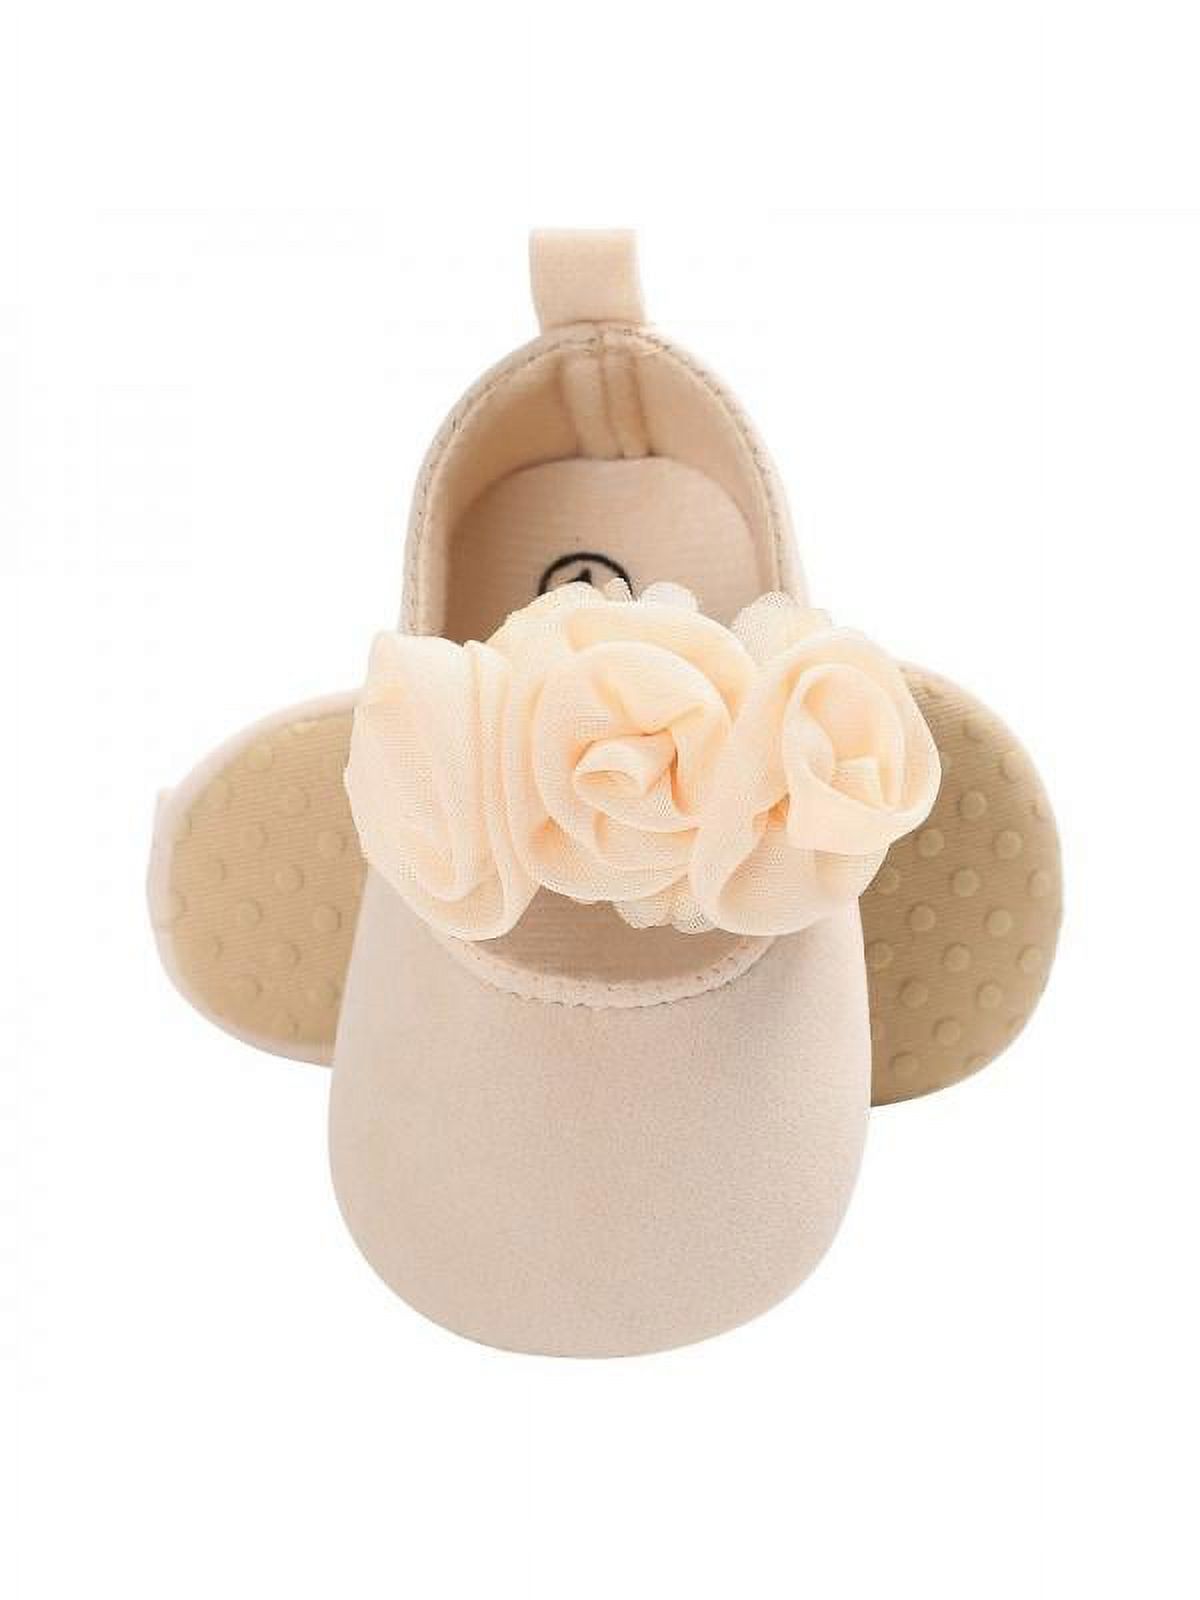 Lovely Kid Girls Princess Shoes Flowers Dance Shoes Suede Ballet Shoes Anti-slip Soft Sole Crib Hook & Loop Shoes (Toddler/Little Baby Girls) - image 2 of 7